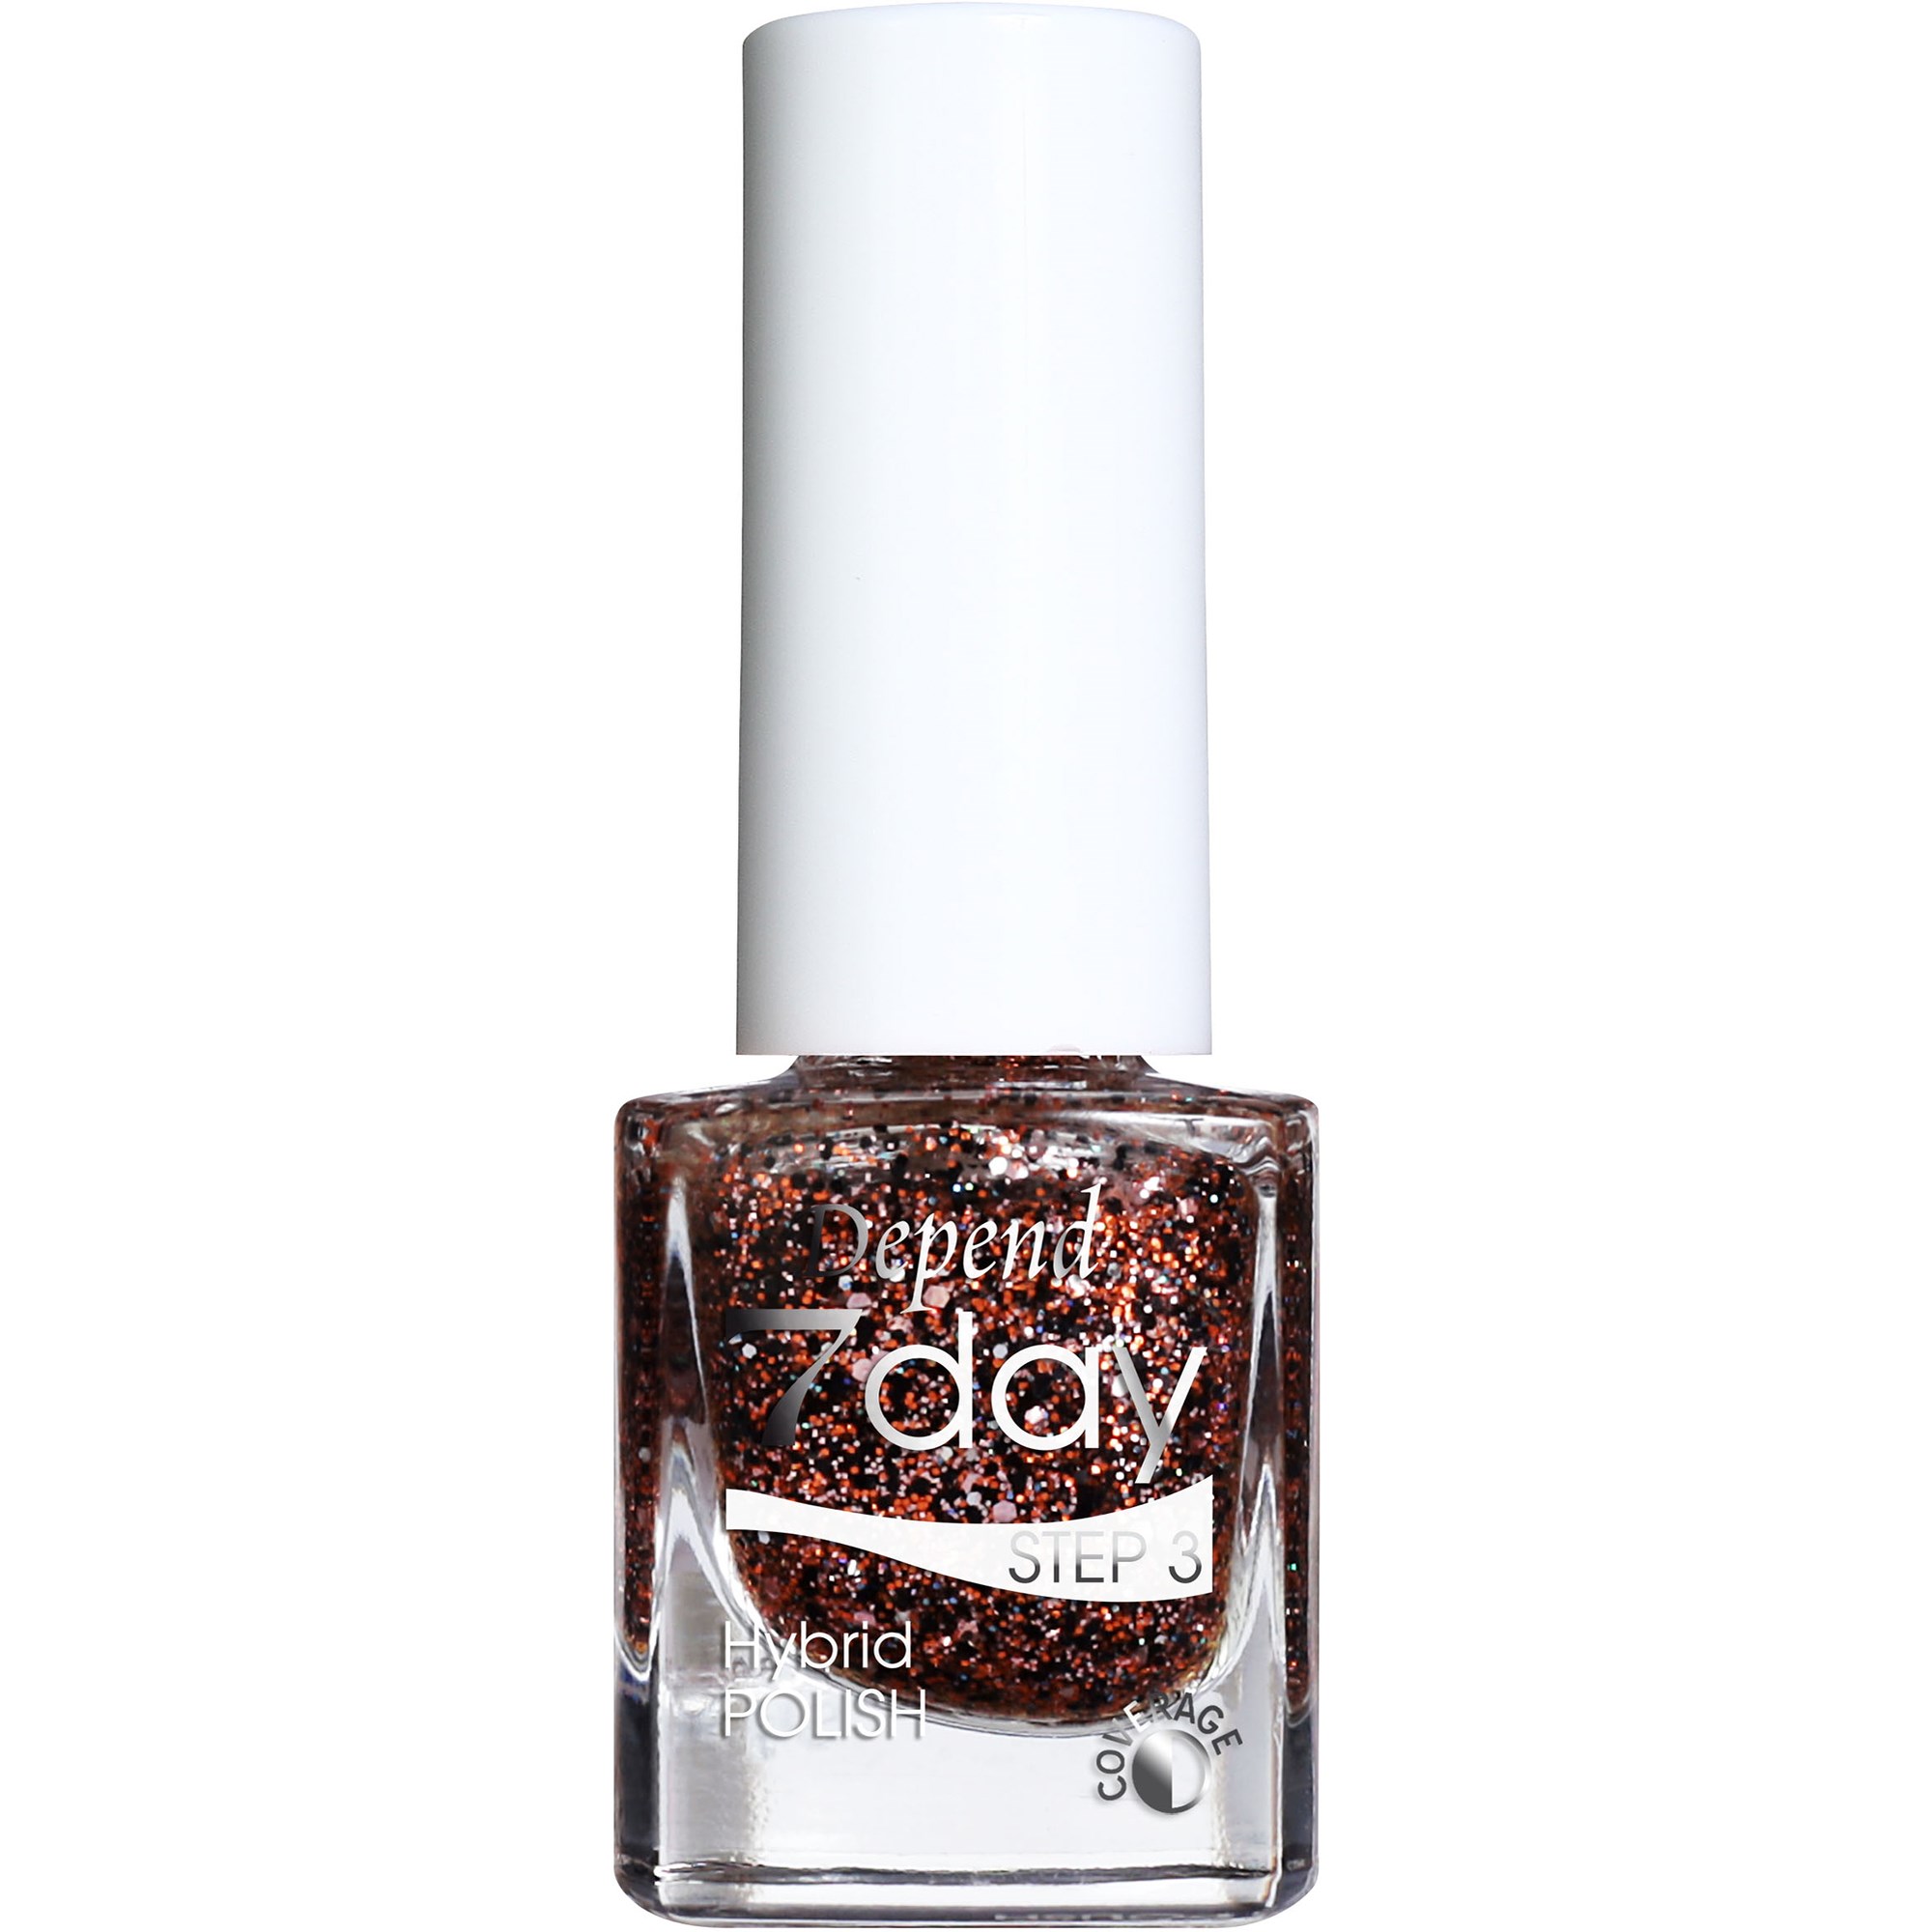 Depend 7day Holiday Selection Hybrid Polish Make Your Own Magic